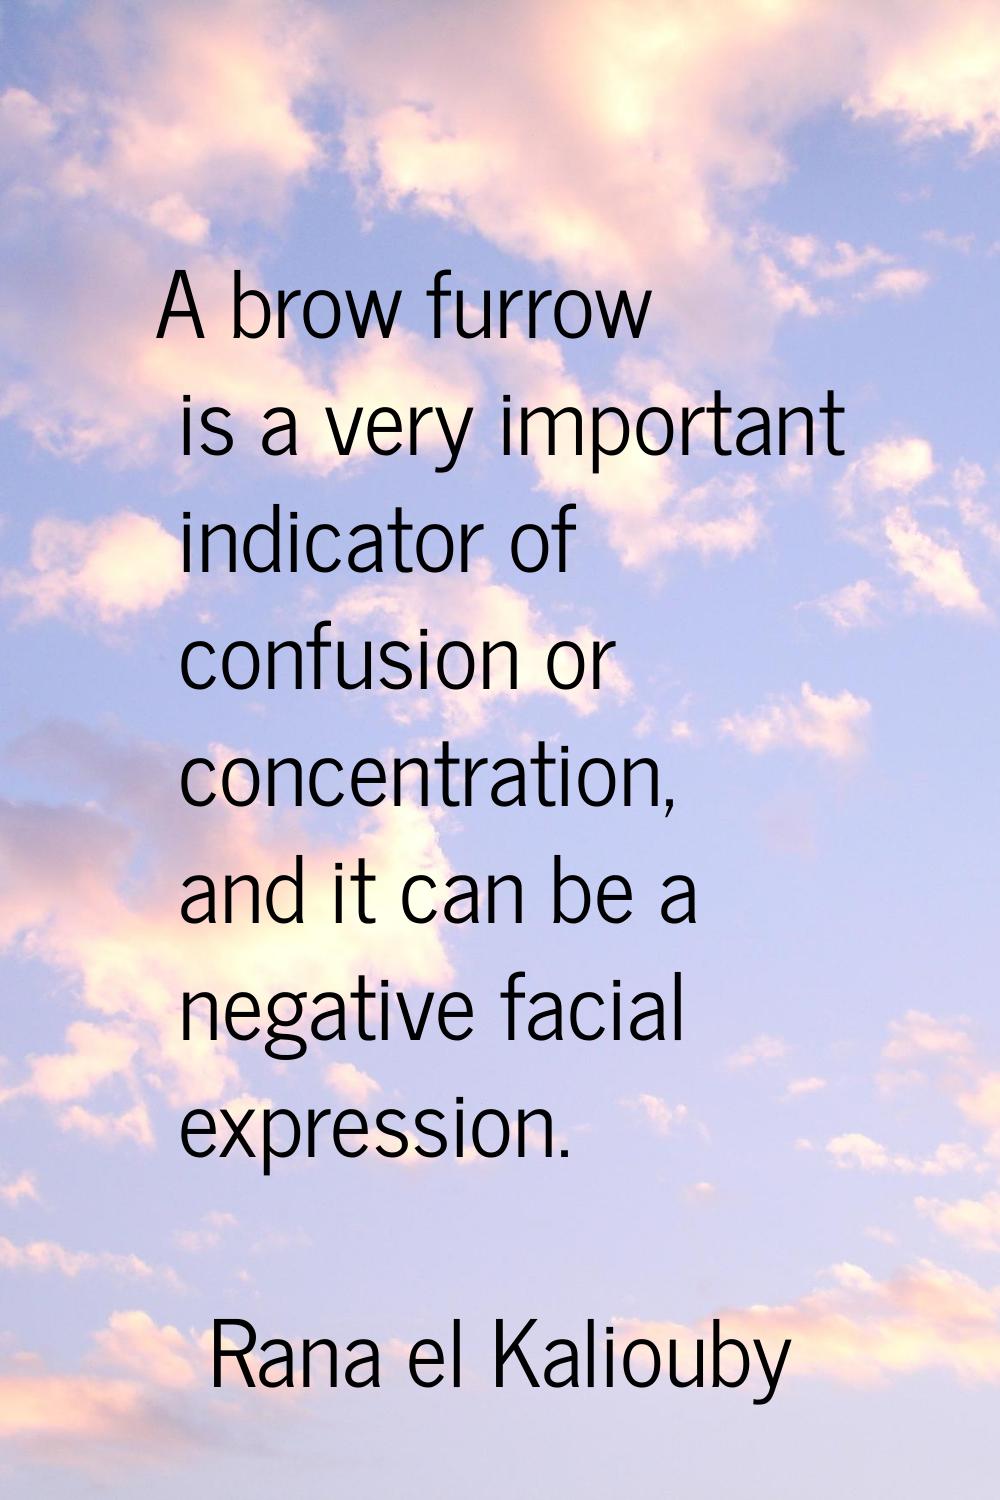 A brow furrow is a very important indicator of confusion or concentration, and it can be a negative